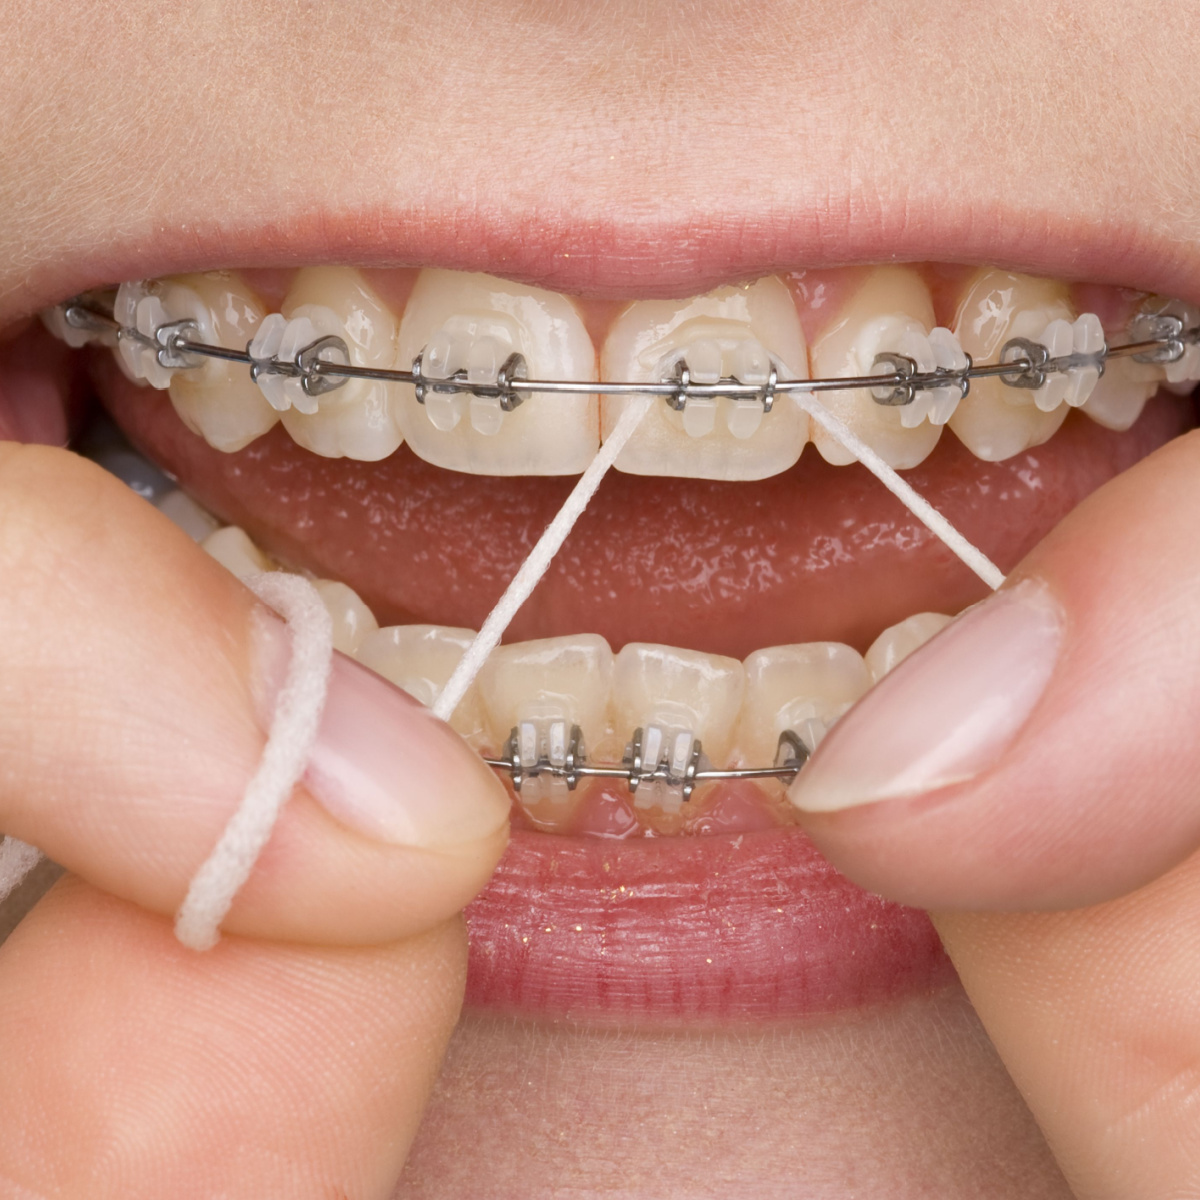 A patient with braces flossing